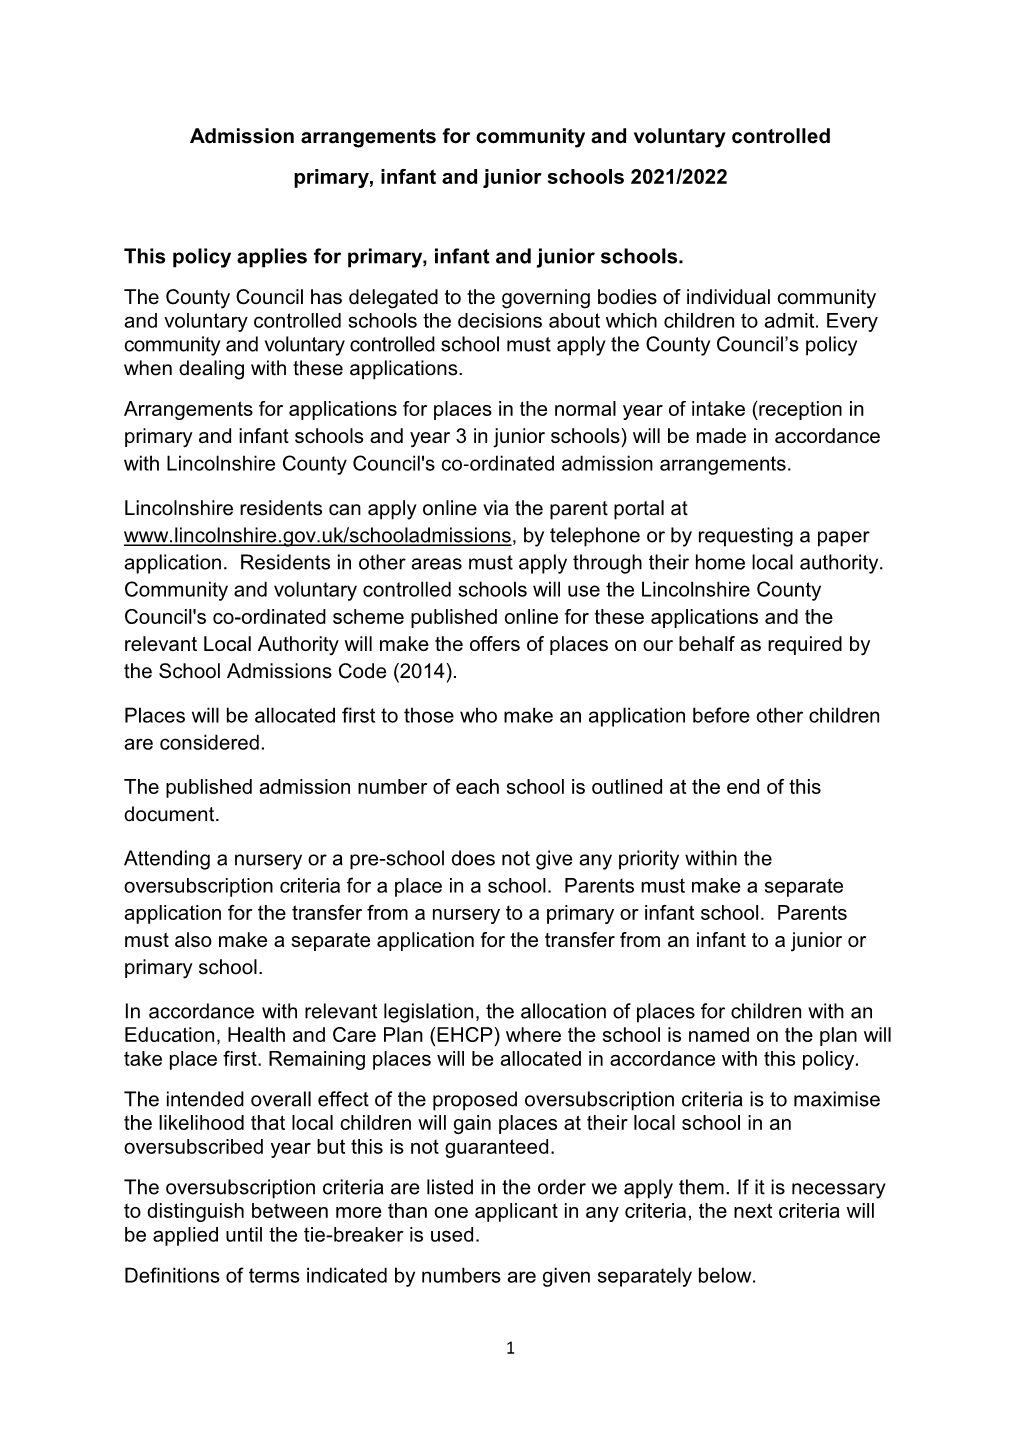 Primary School Admissions Policy 2021-2022